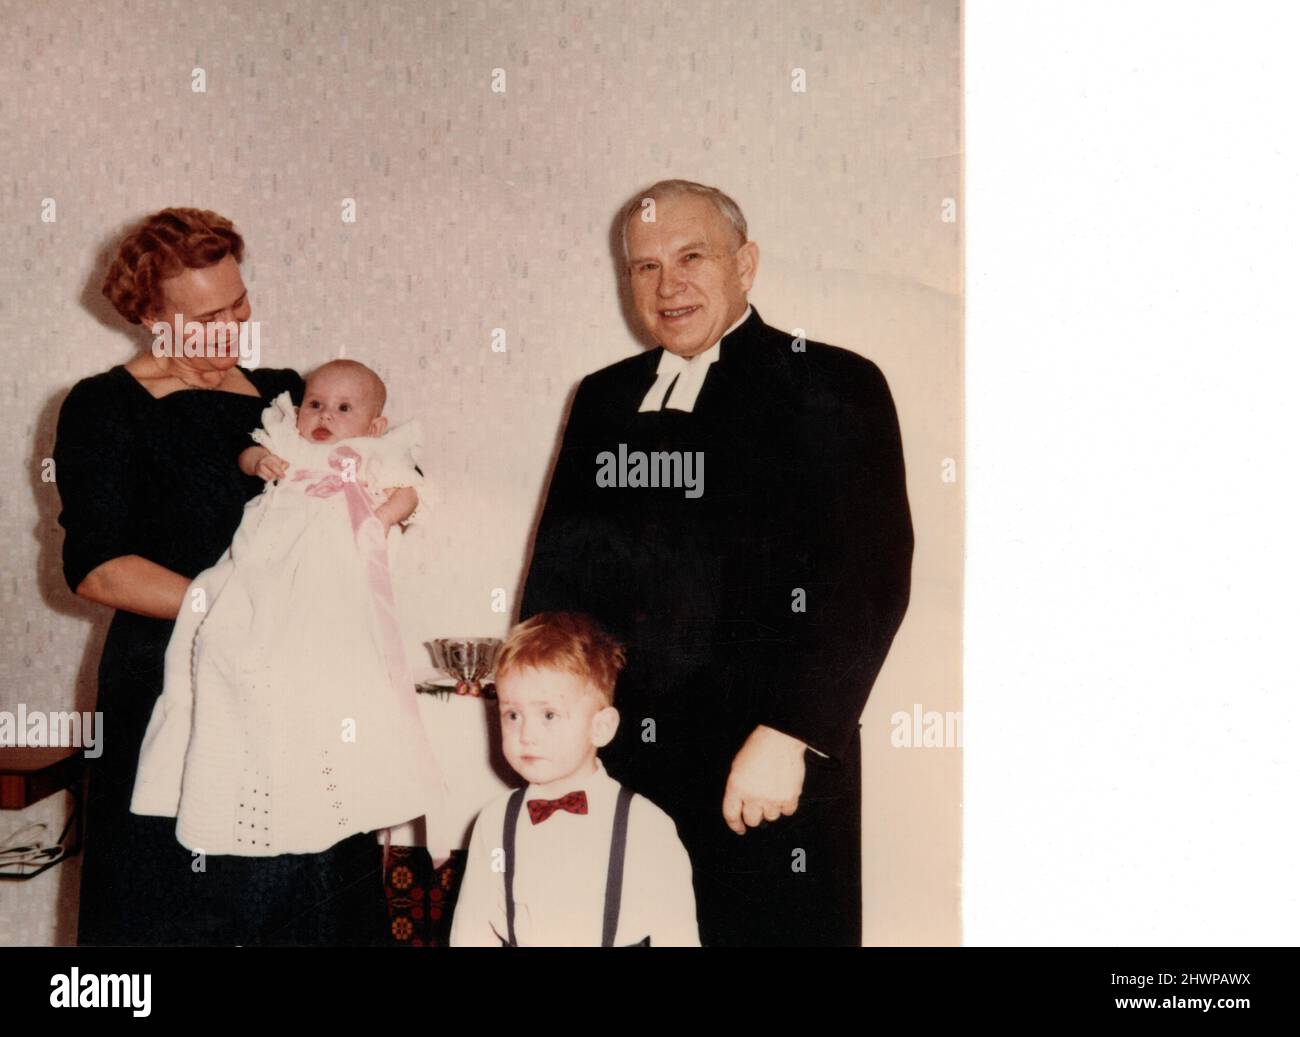 Priest, mother holding baby and small boy in smart clothes, 1960 Sweden. Concept of family, nostalgia, togetherness, yesteryear Stock Photo